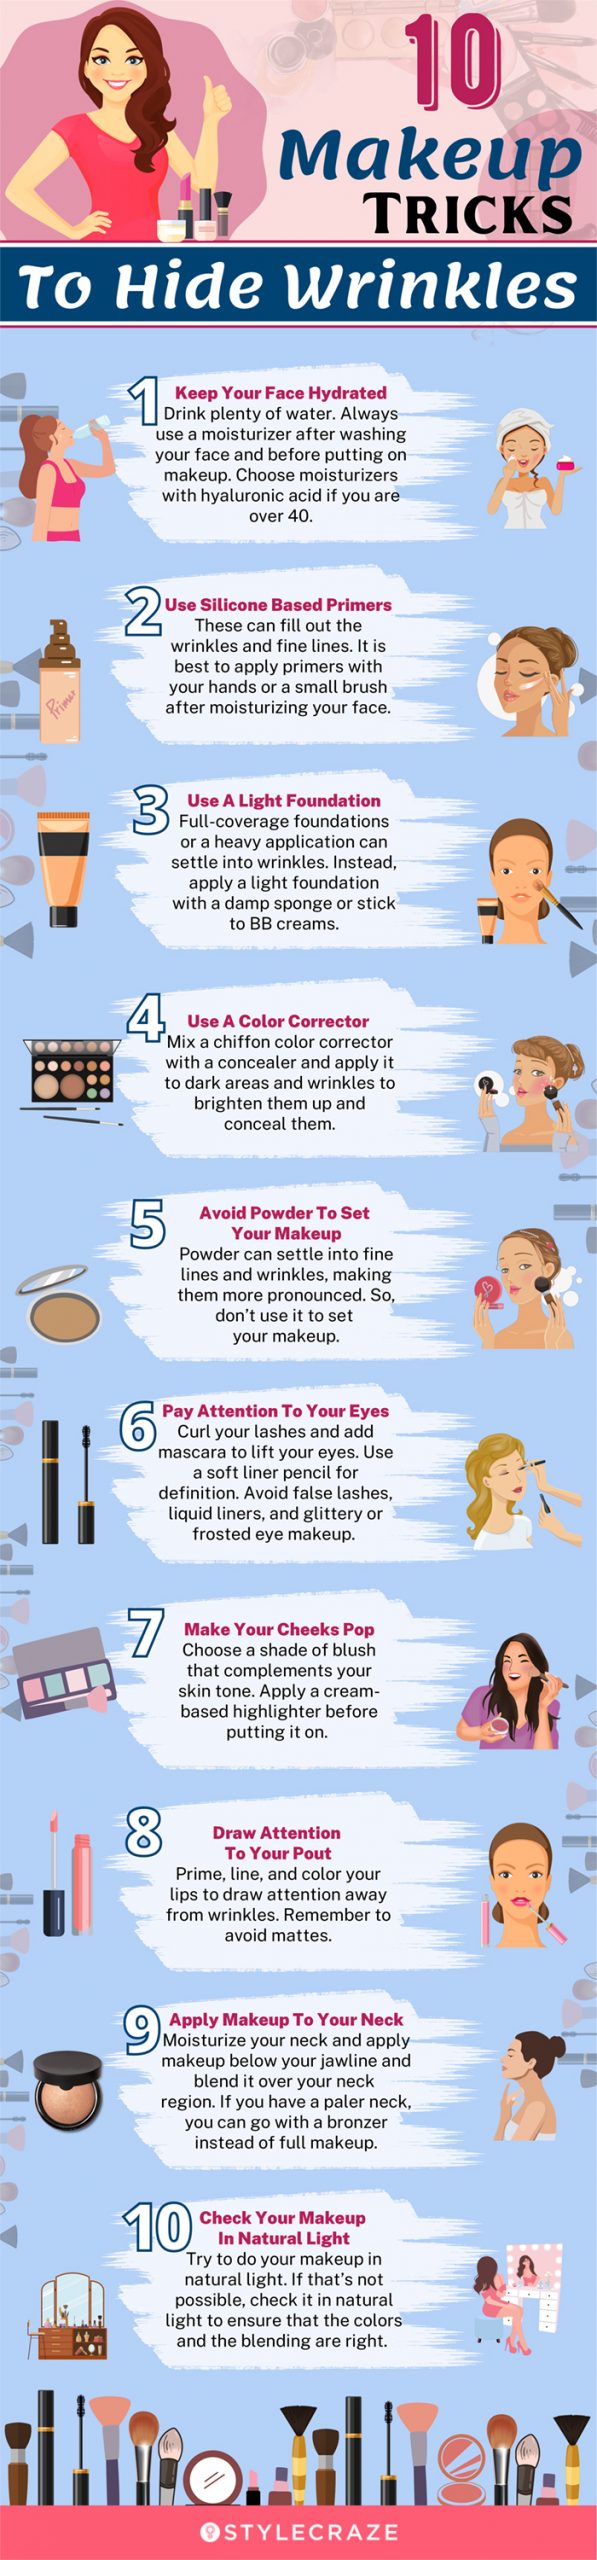 makeup tricks to hide wrinkles [infographic]